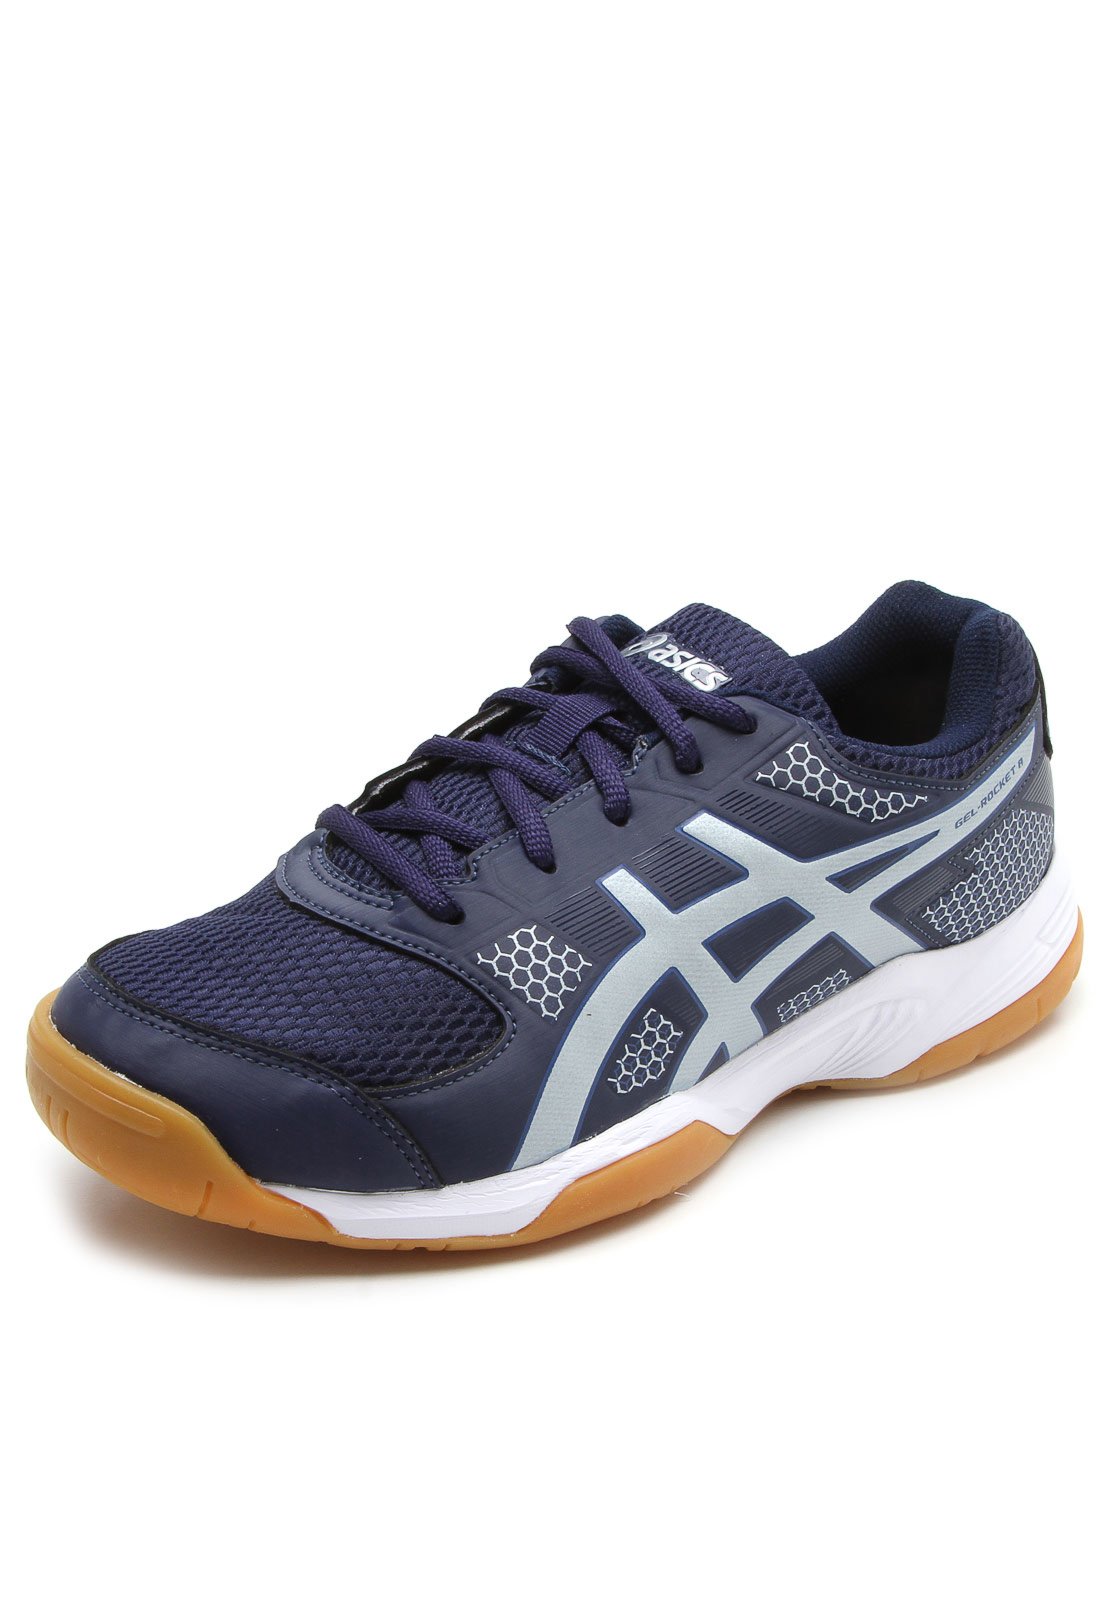 Directly Definition Not complicated Asics Rocket 8a Clearance, 53% OFF | www.outdoorwritersofohio.org